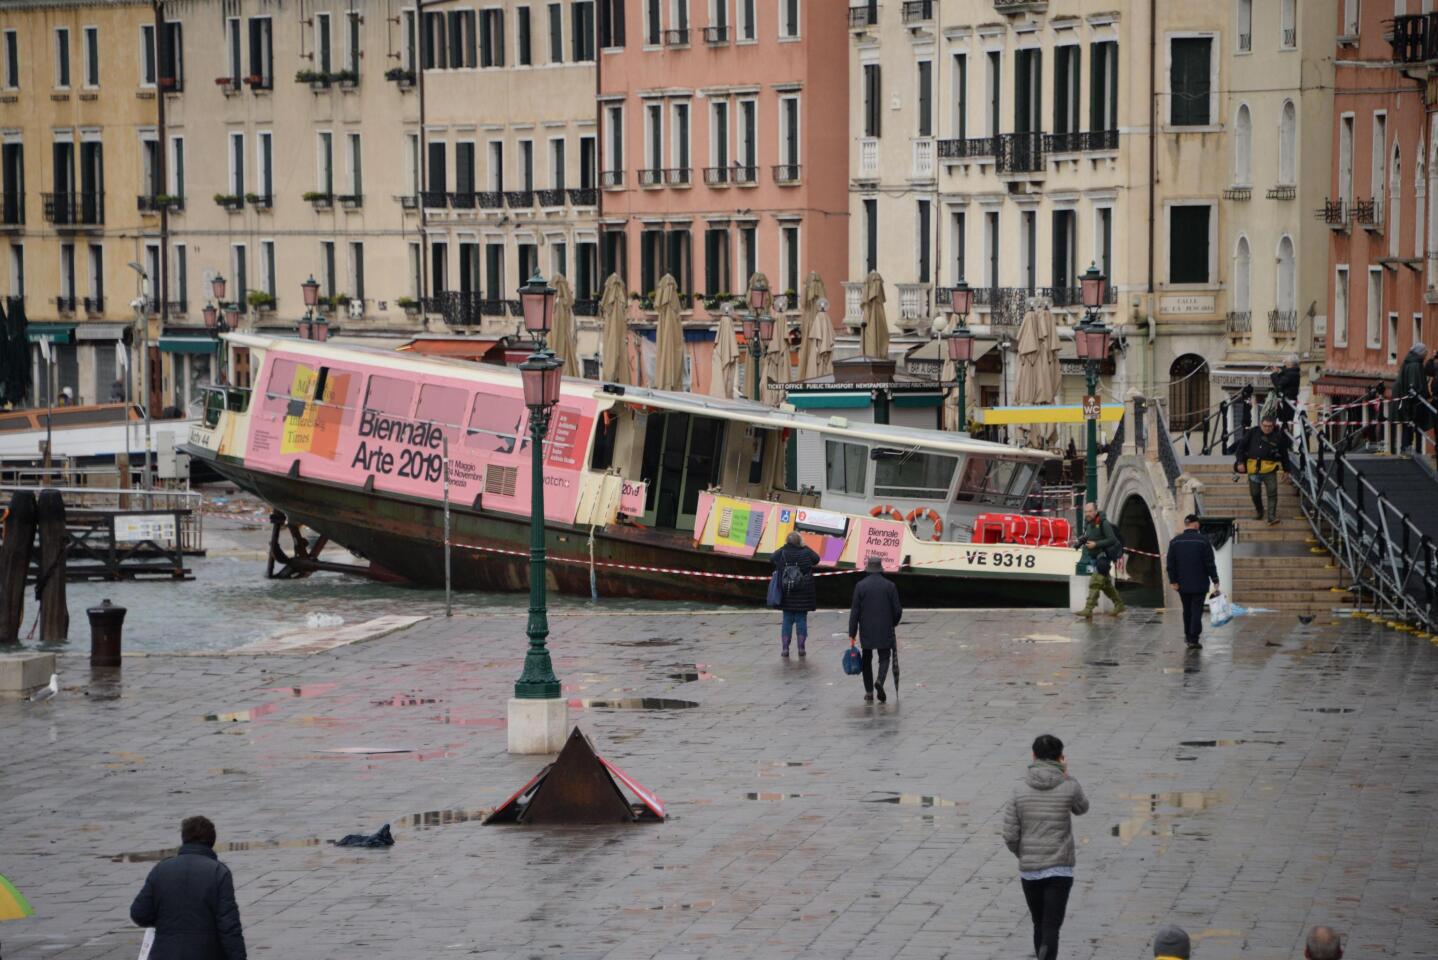 A view of a ferry stranded on the docks following bad weather in Venice.